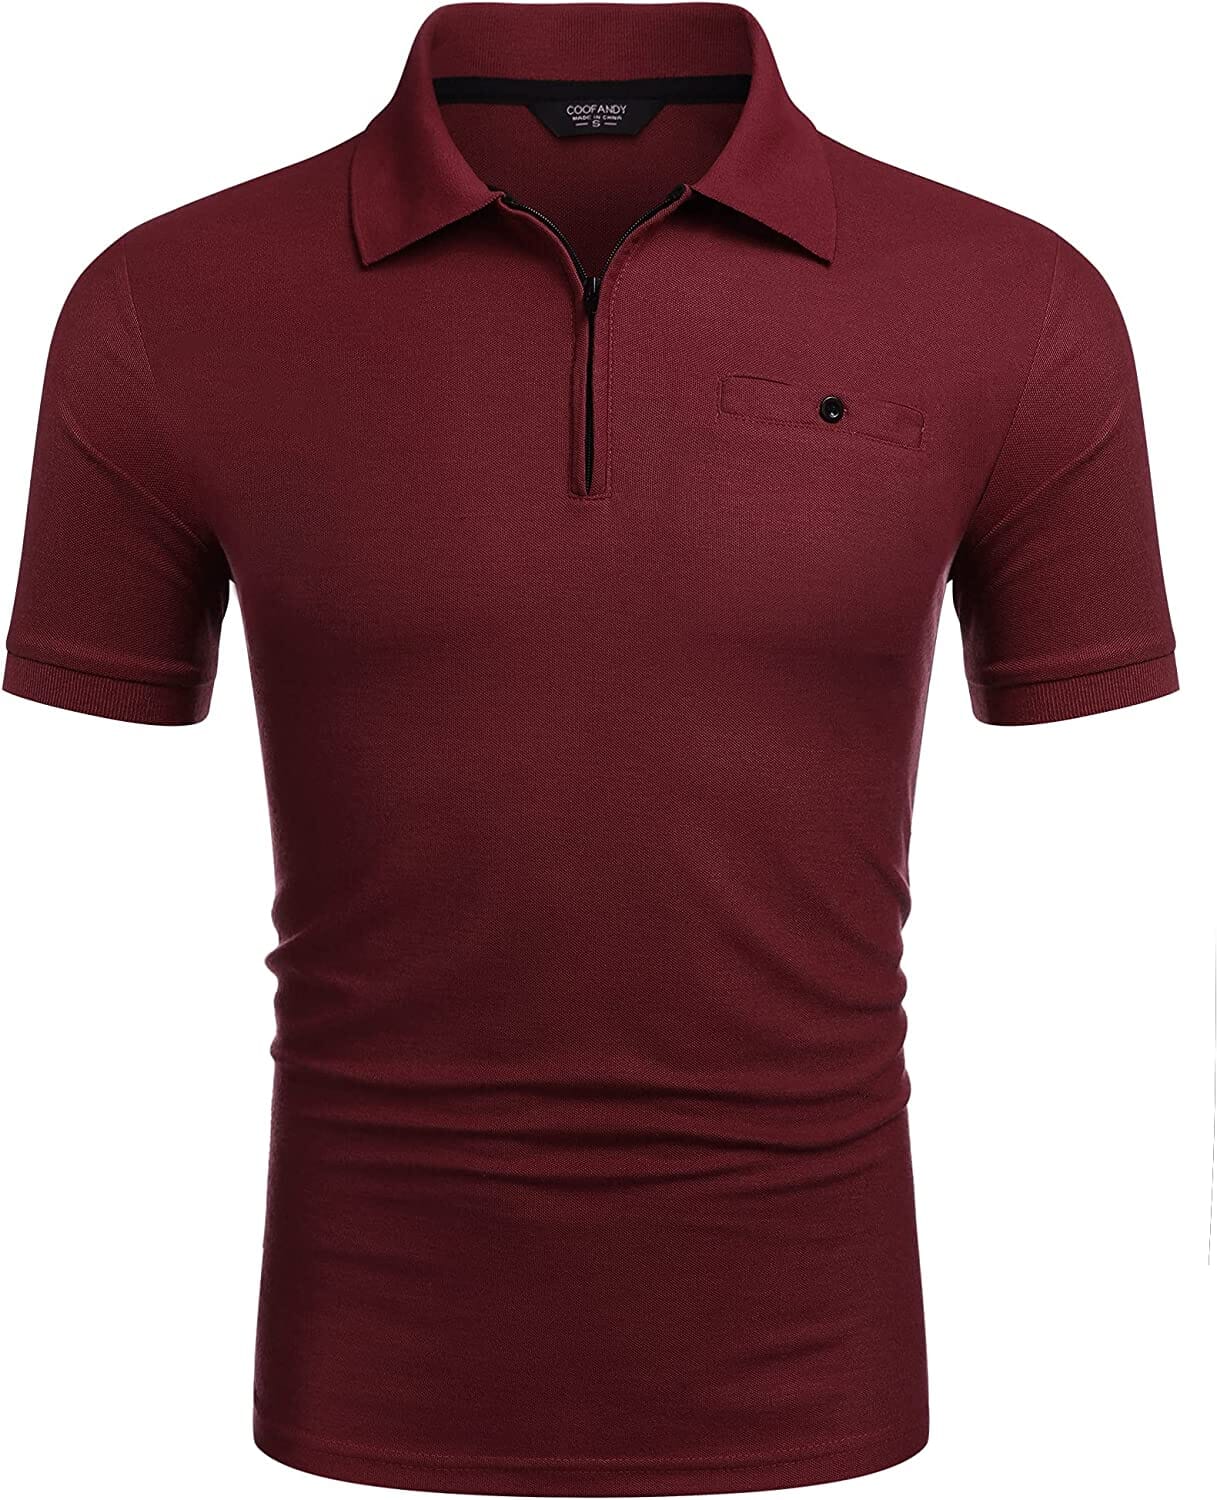 Slim Fit Zipper Polo Golf Shirt (US Only) Polos COOFANDY Store Wine Red M 